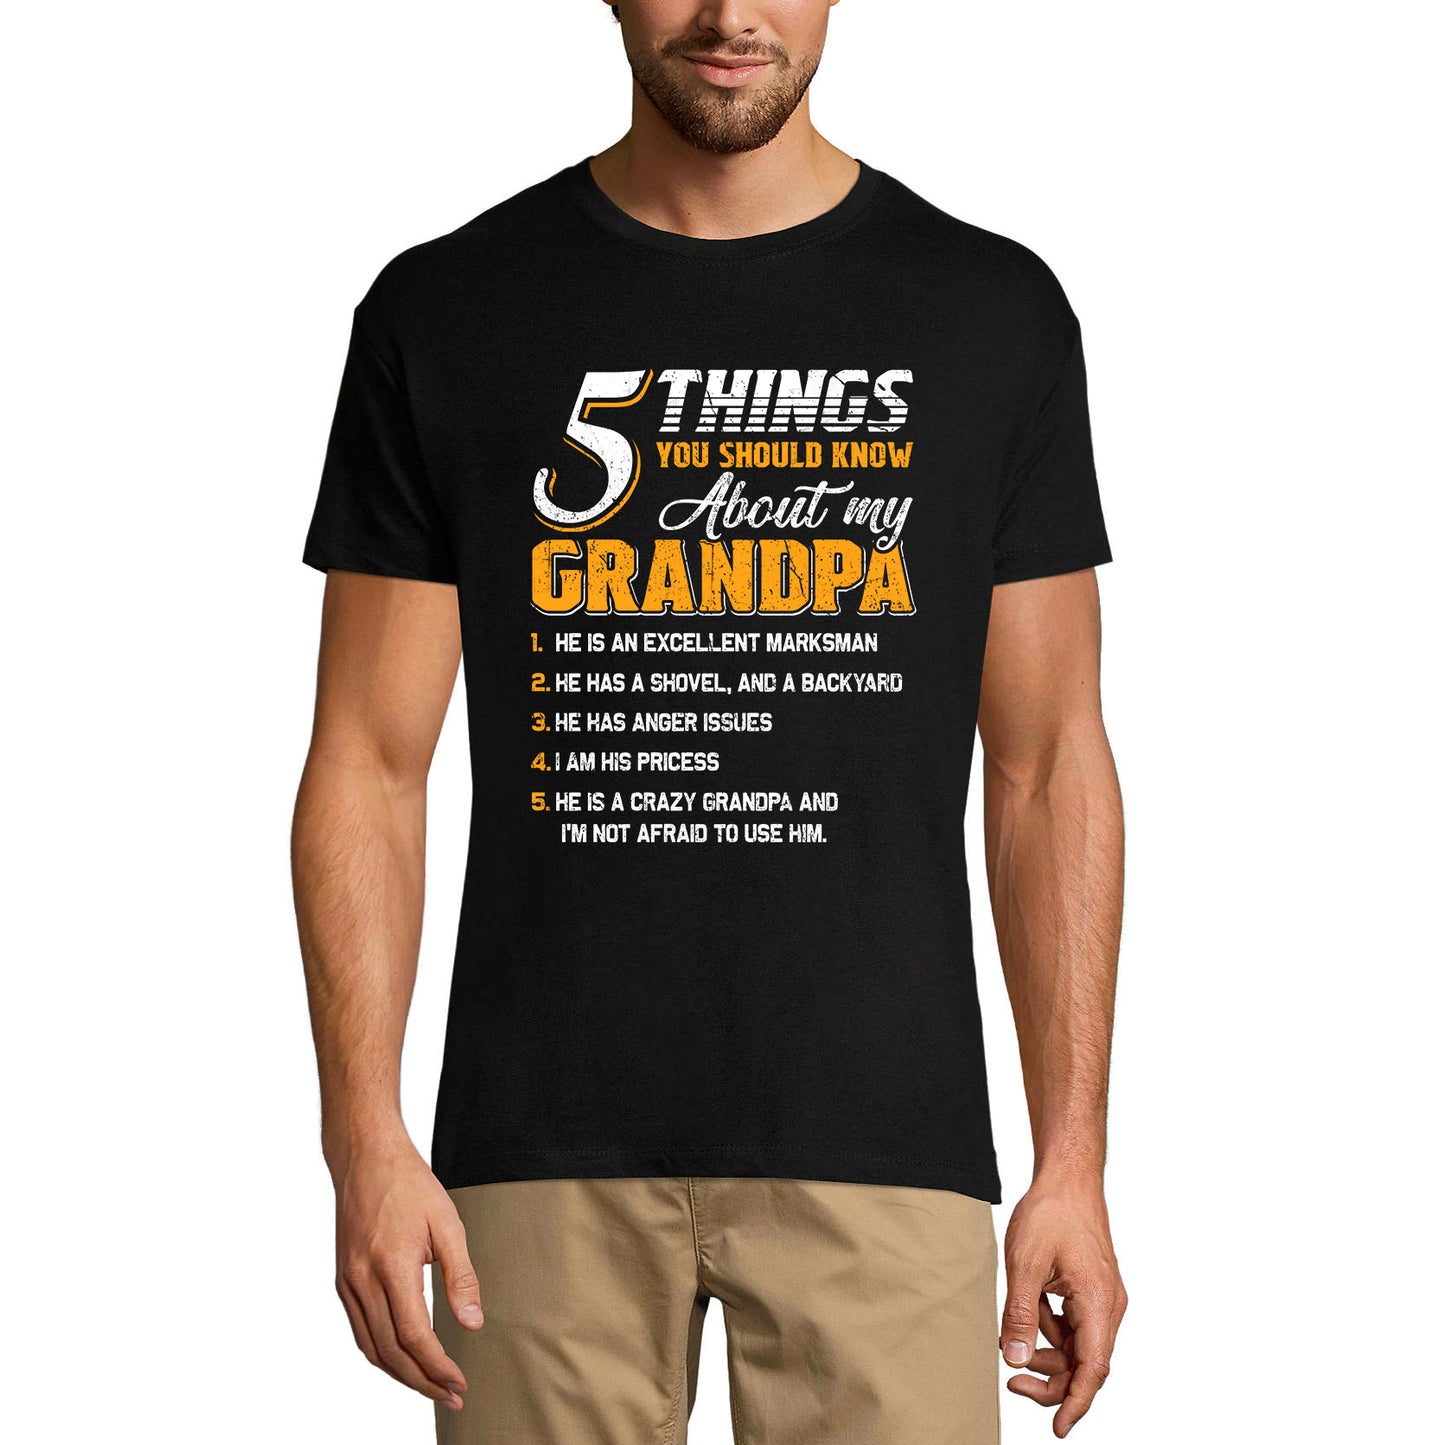 ULTRABASIC Men's Graphic T-Shirt 5 Things You Should Know About My Grandpa - Family Time